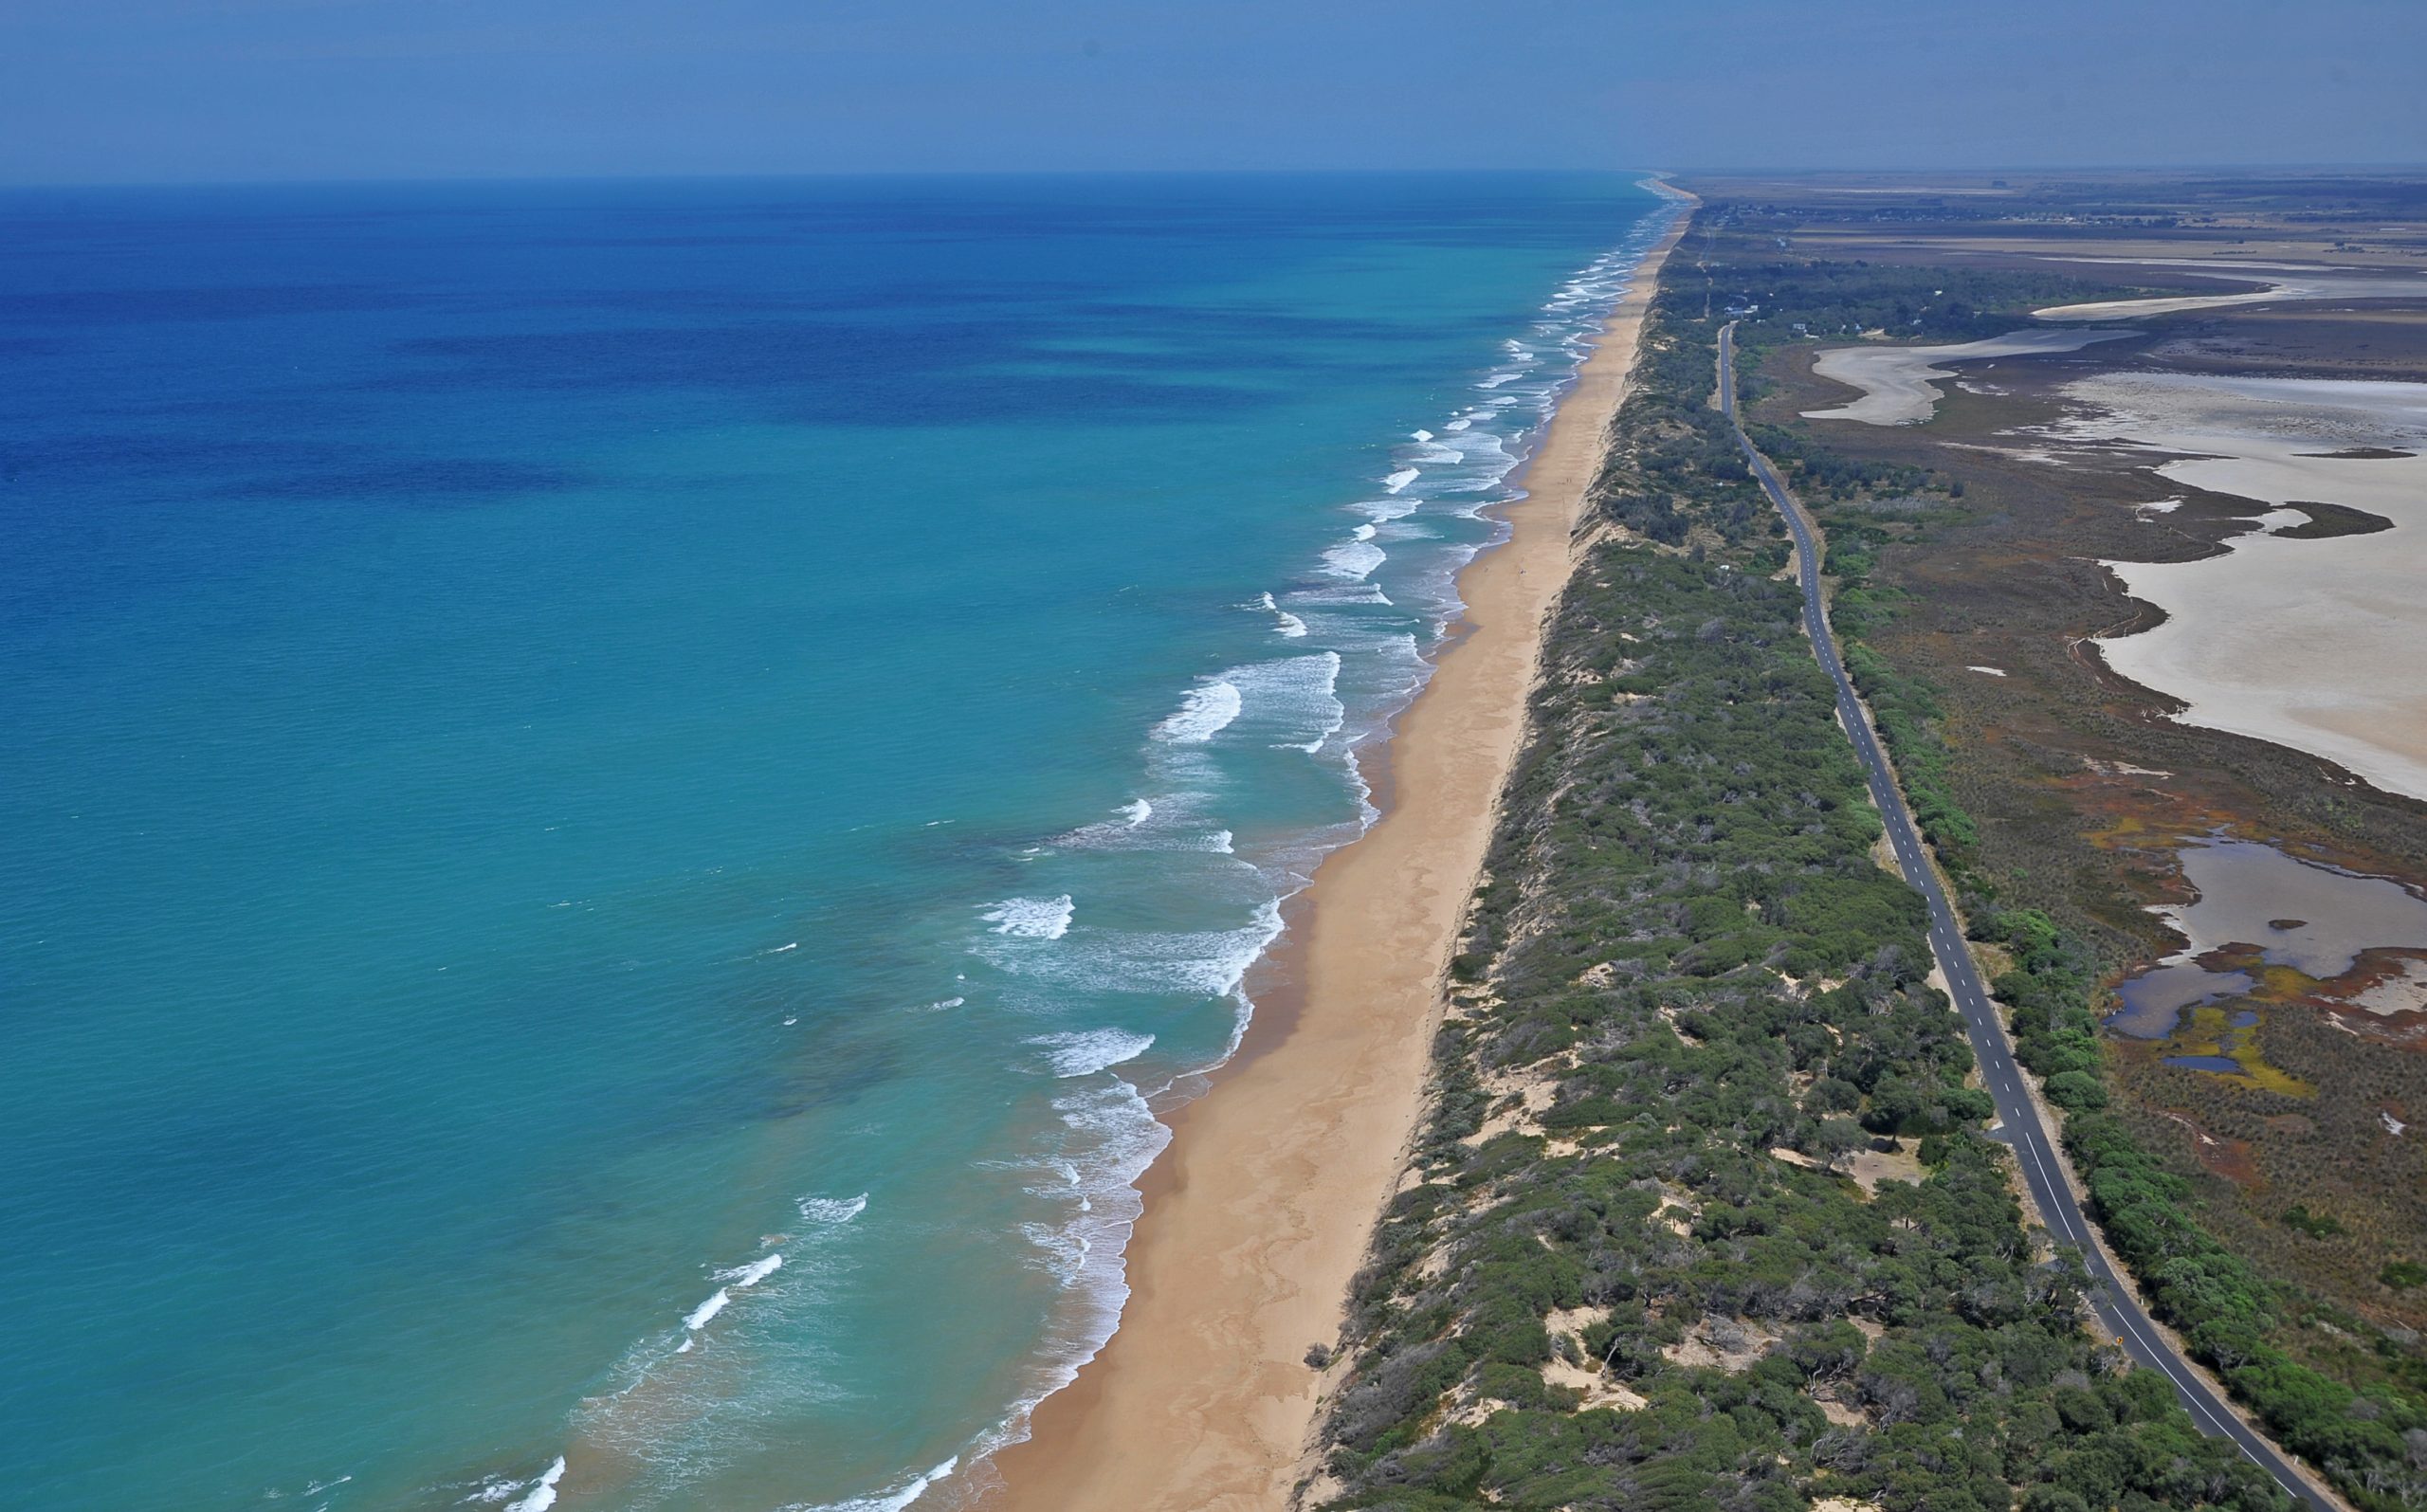 Aerial view of Ninety Mile Beach in Victoria Australia, with the light sand and light blue waters stretching out into the distance.